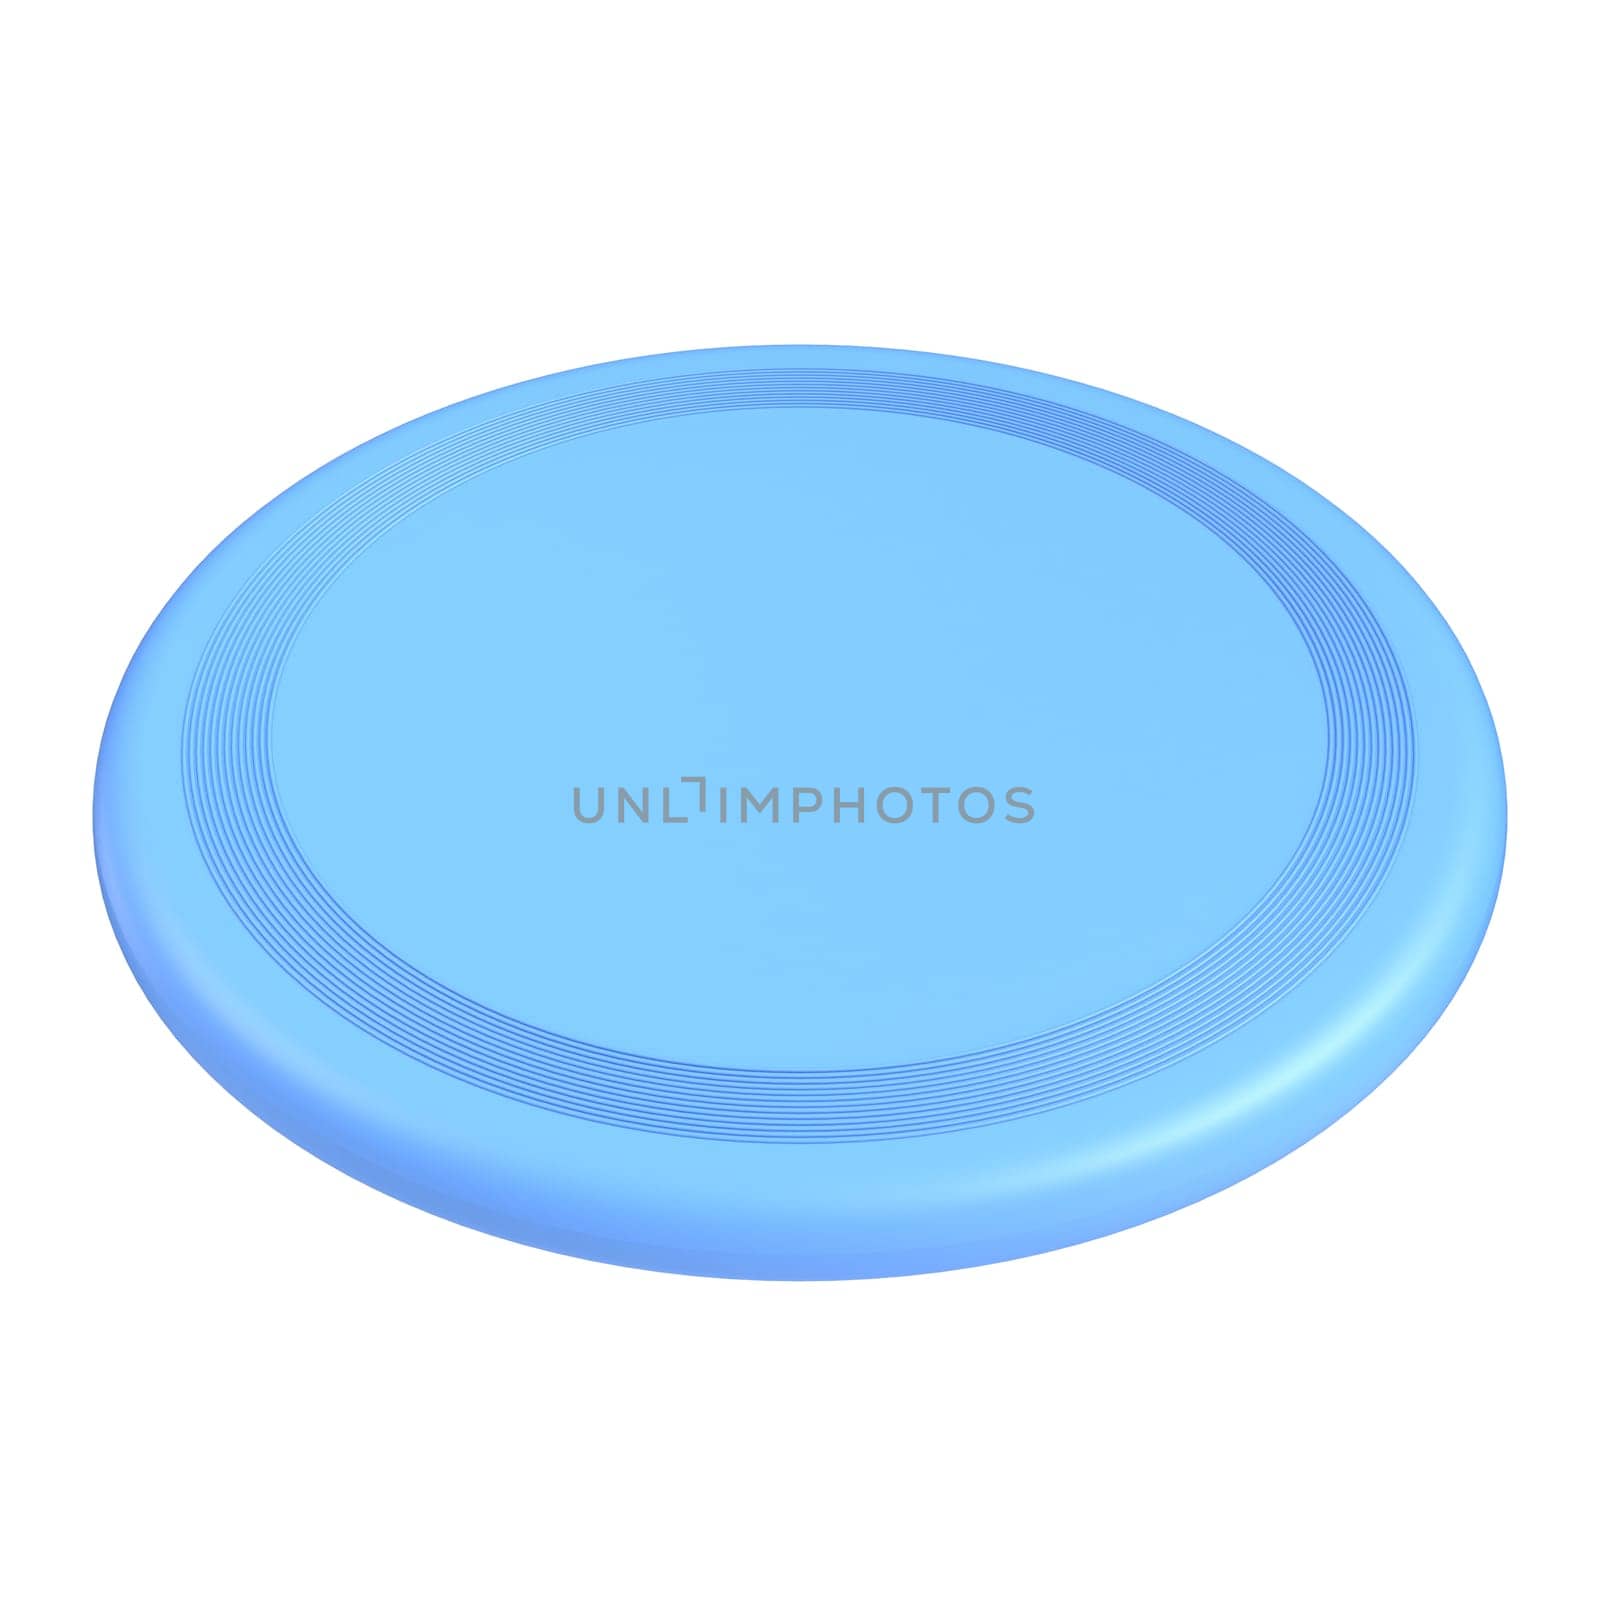 Blue frisbee 3D rendering illustration isolated on white background